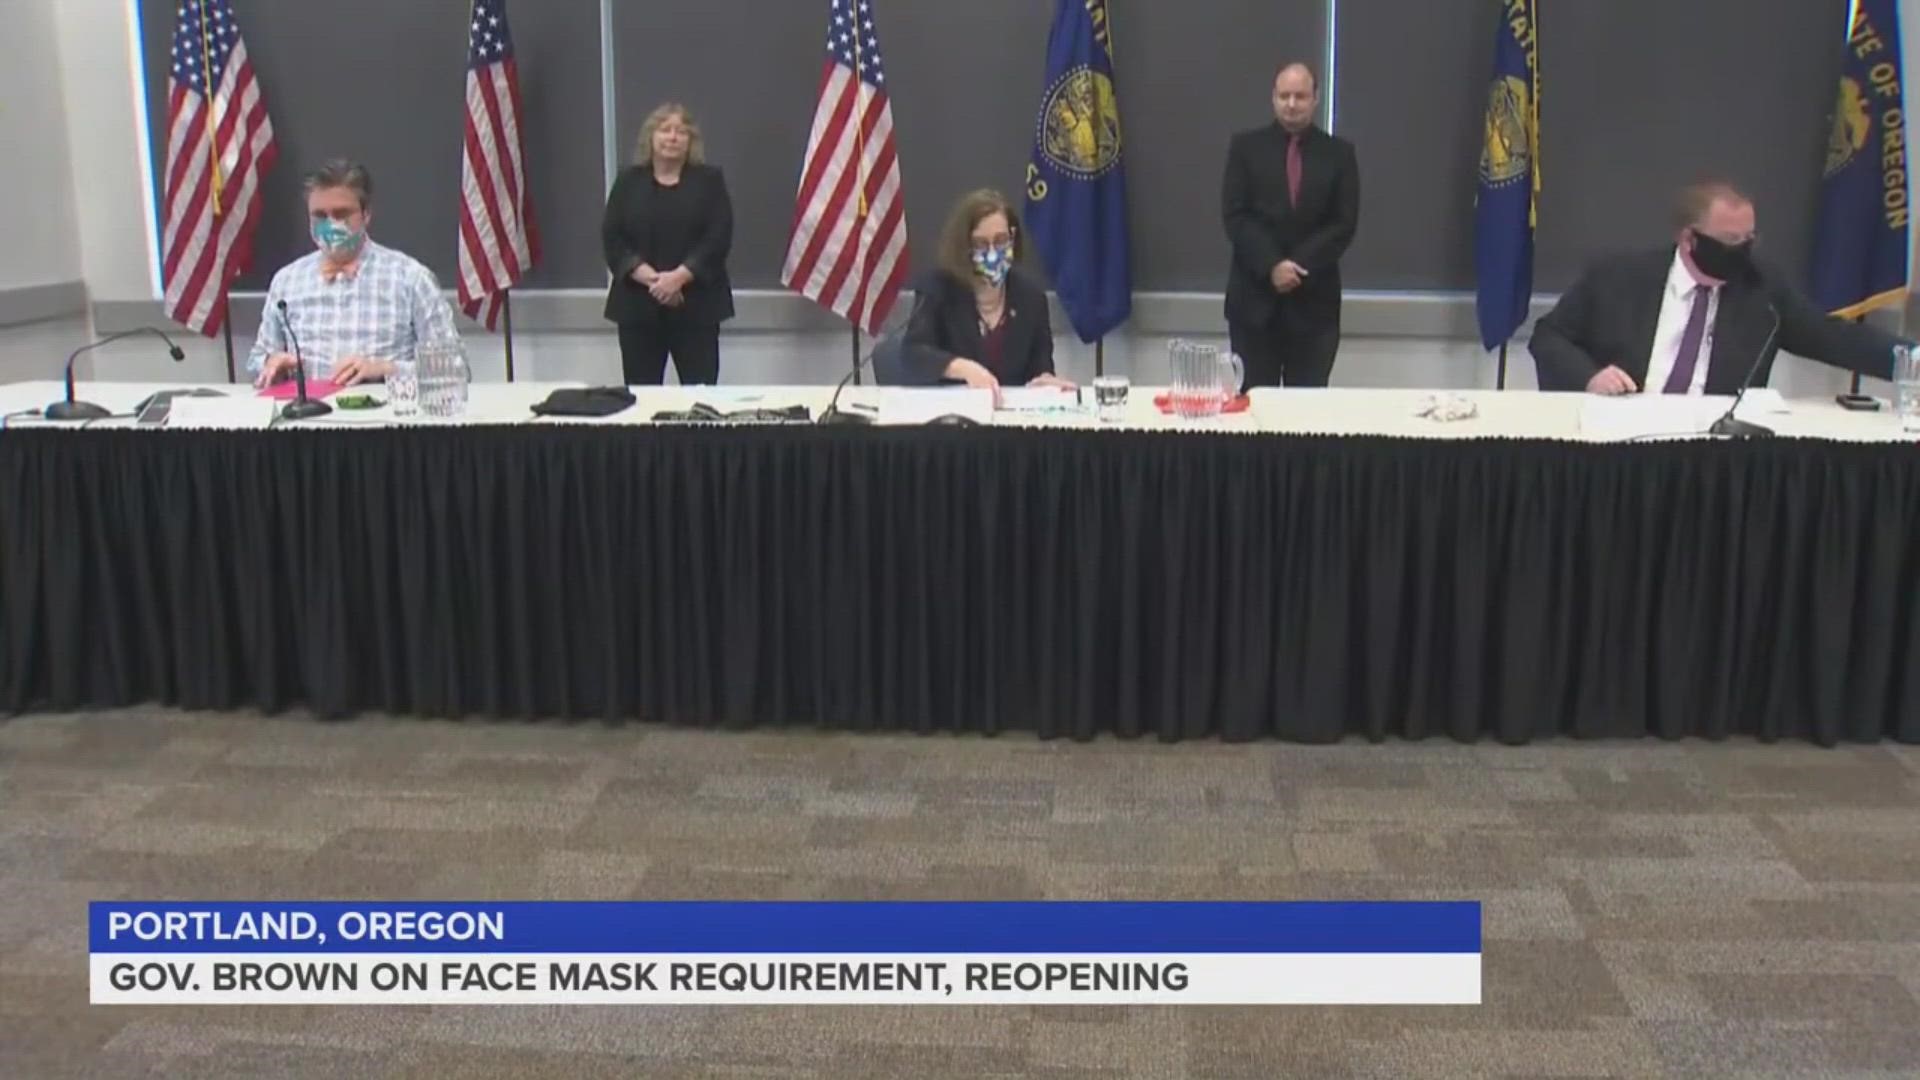 Gov. Kate Brown elaborates on face mask rules that will go into effect June 24 in several Oregon counties.